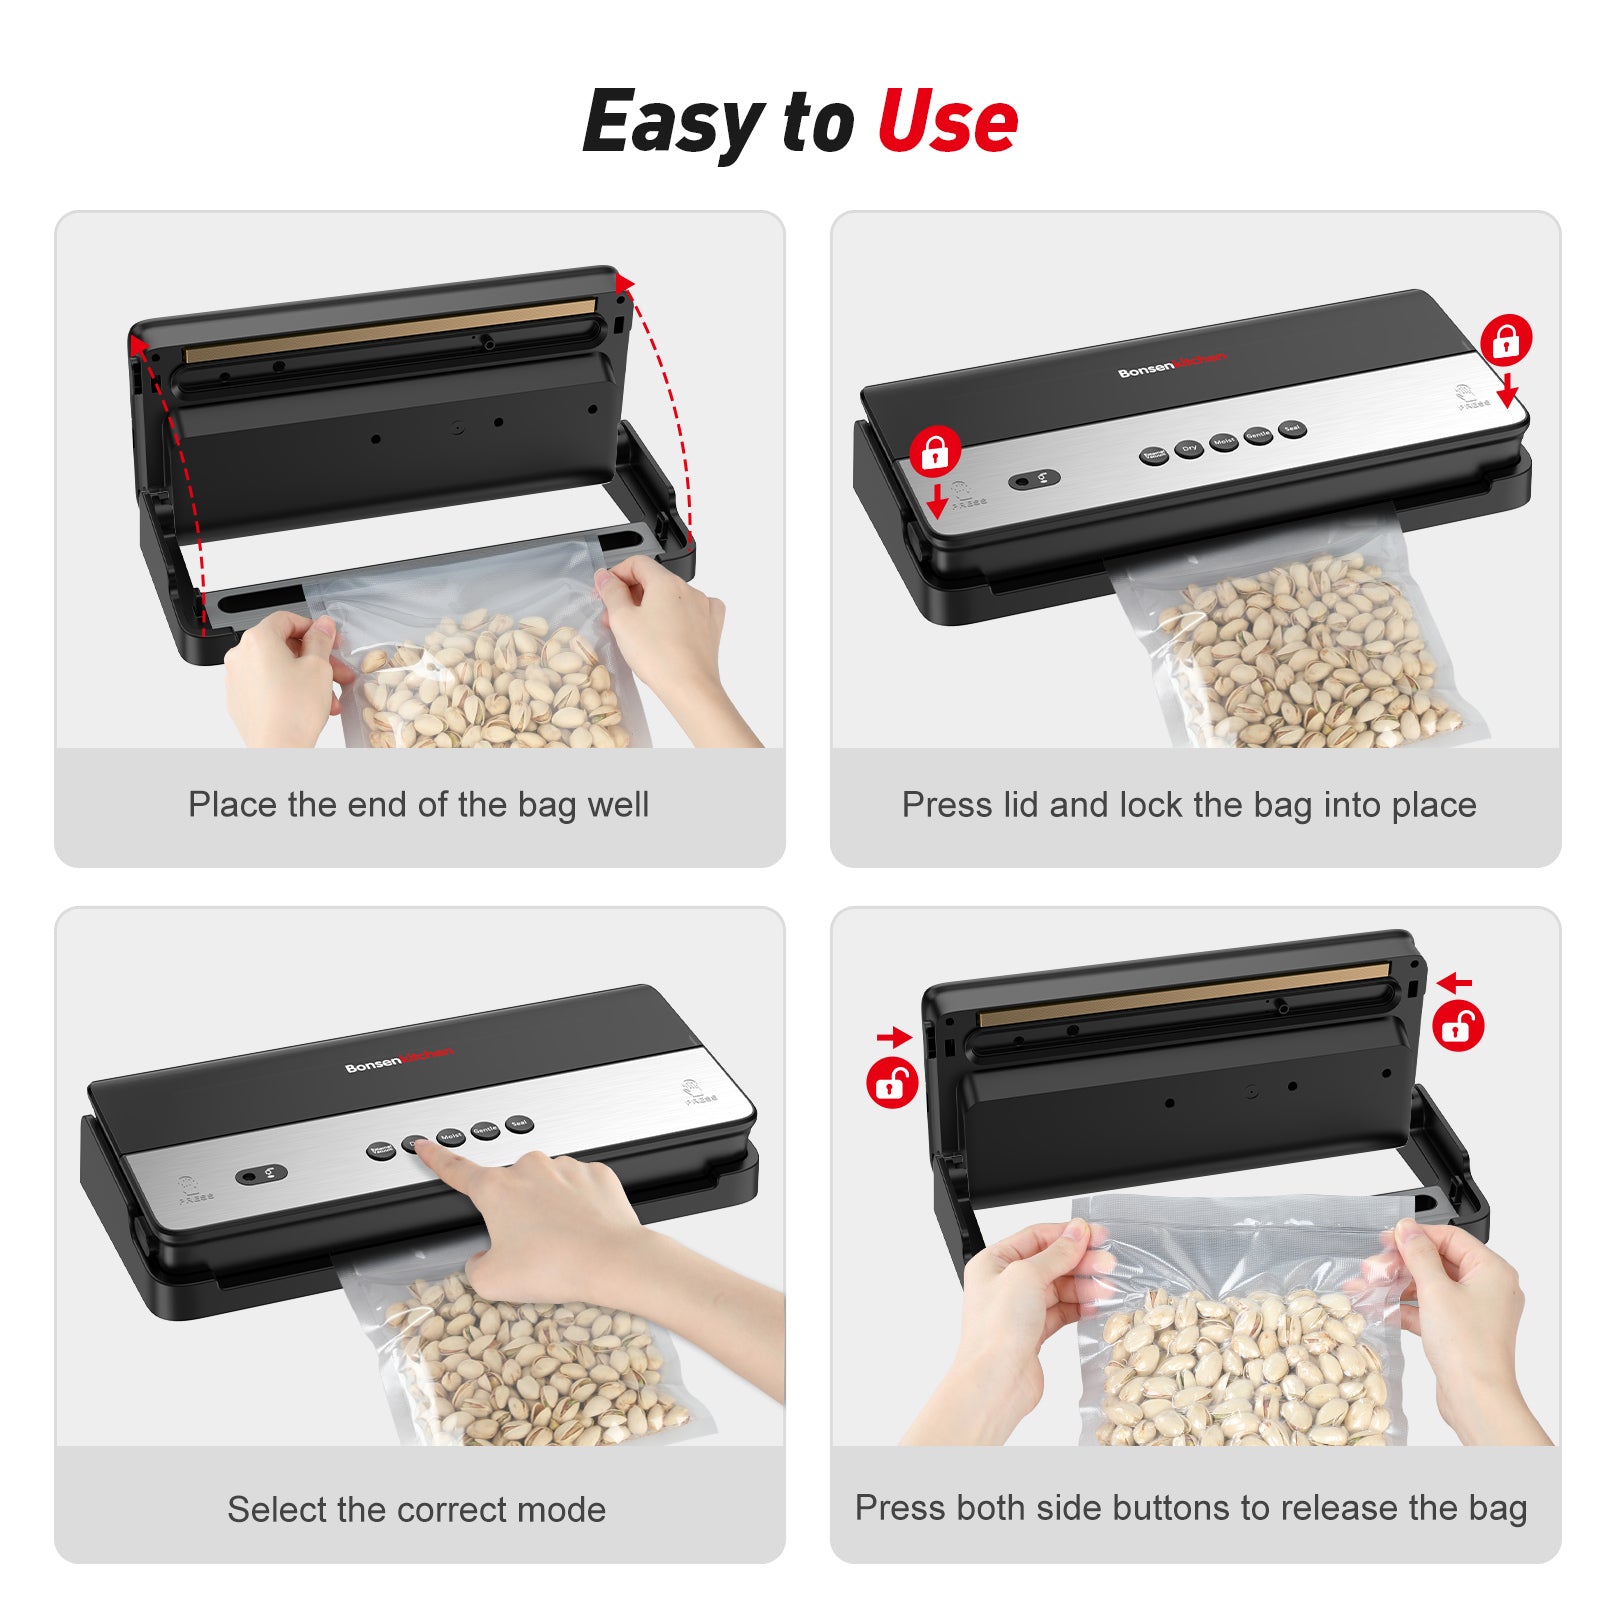 Bonsenkitchen Vacuum Sealer Machine, Stainless Steel Vacuum Food Sealer  with 8-in-1 Vacuum Sealing System, 6 Food Vacuum Modes, Built-in Cutter and